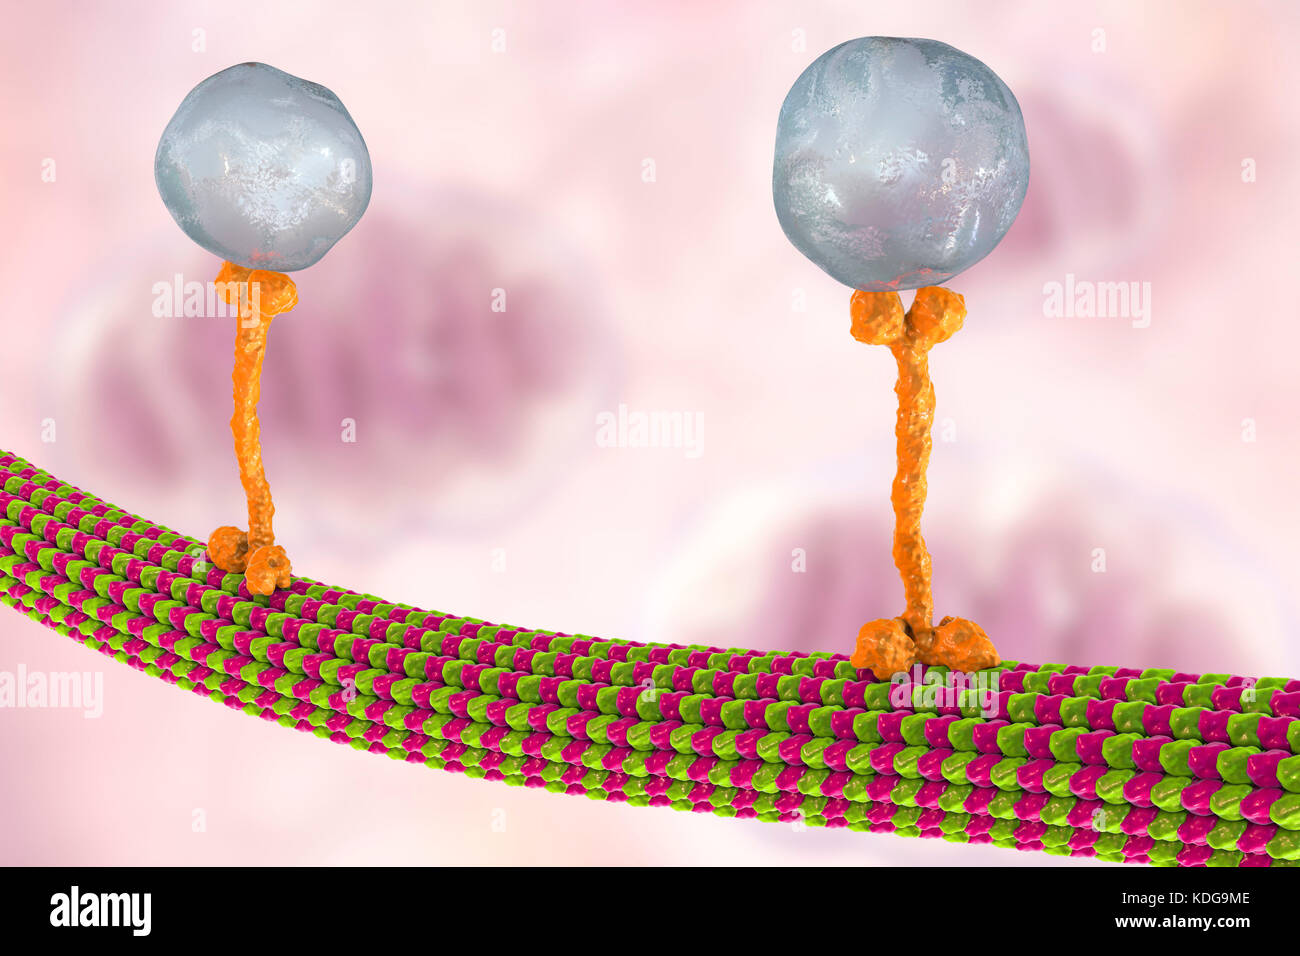 Intracellular transport. Computer illustration of vesicles (spheres) being transported along a microtubule by a kinesin motor protein. Kinesins are able to 'walk' along microtubules. Microtubules are polymers of the protein tubulin and are a component of the cytoskeleton. Stock Photo